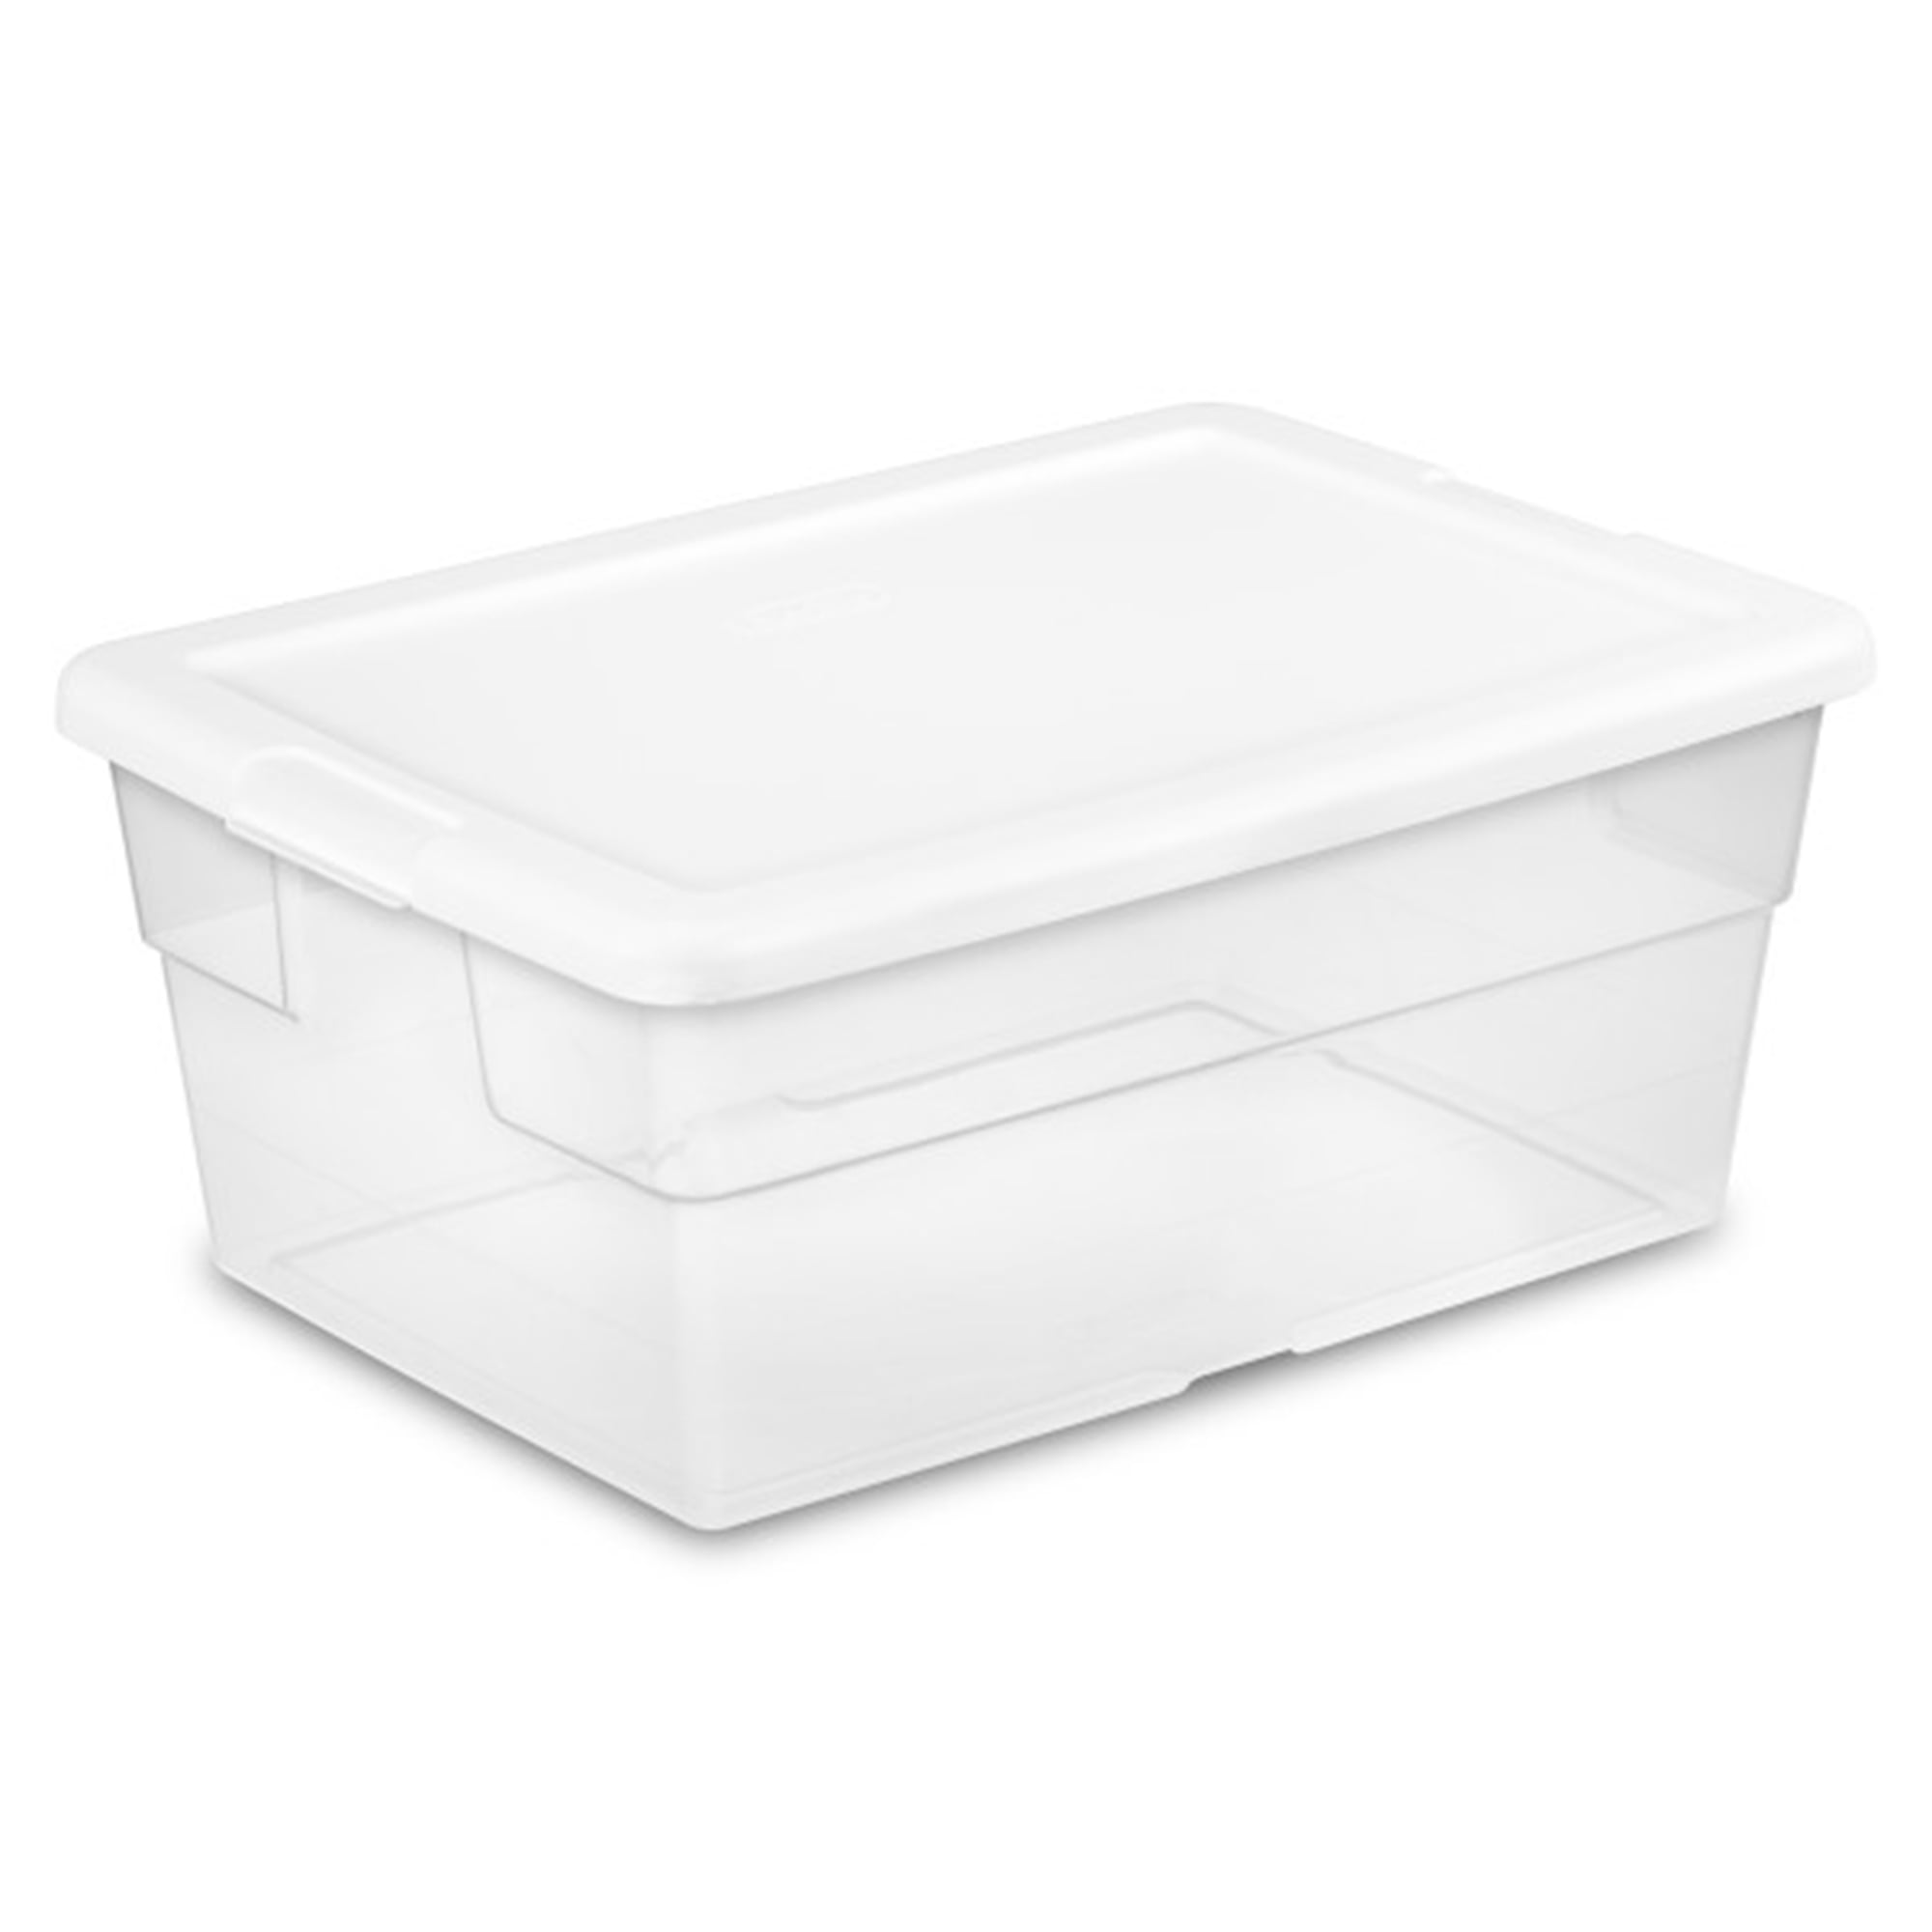 JUJIAJIA Clear Storage Latch Box/bin, 2-Pack Plastic Organizing Container with Handle and Lids (7 QT/16QT)